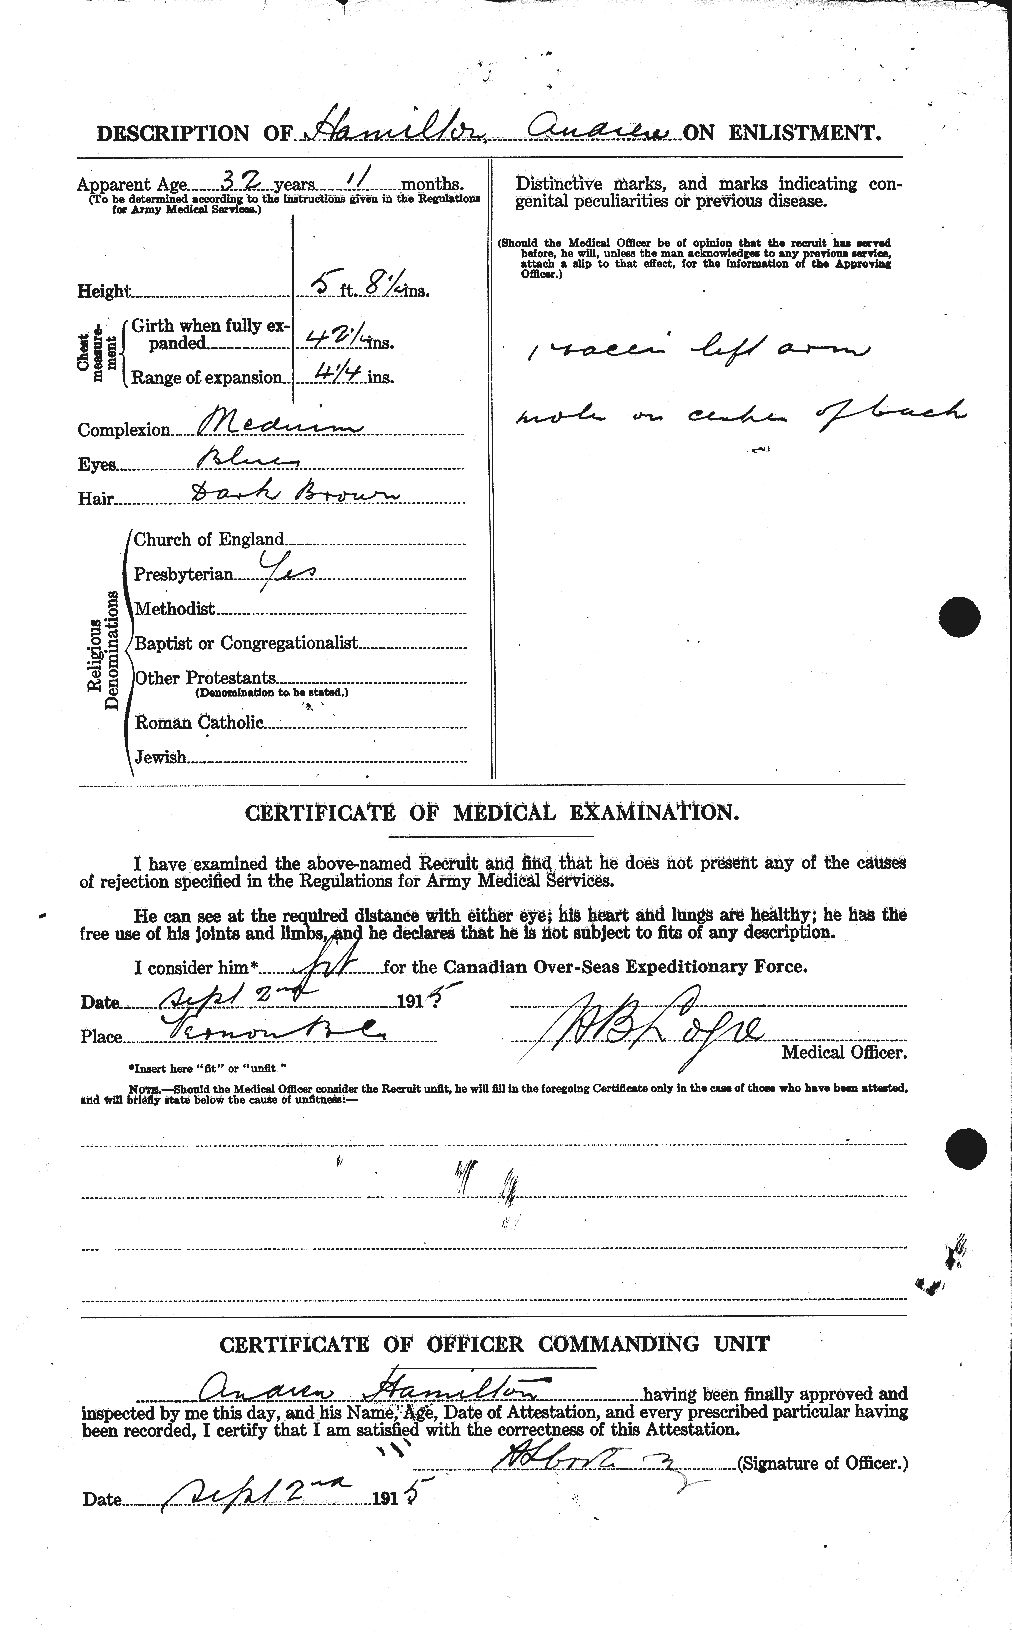 Personnel Records of the First World War - CEF 375221b